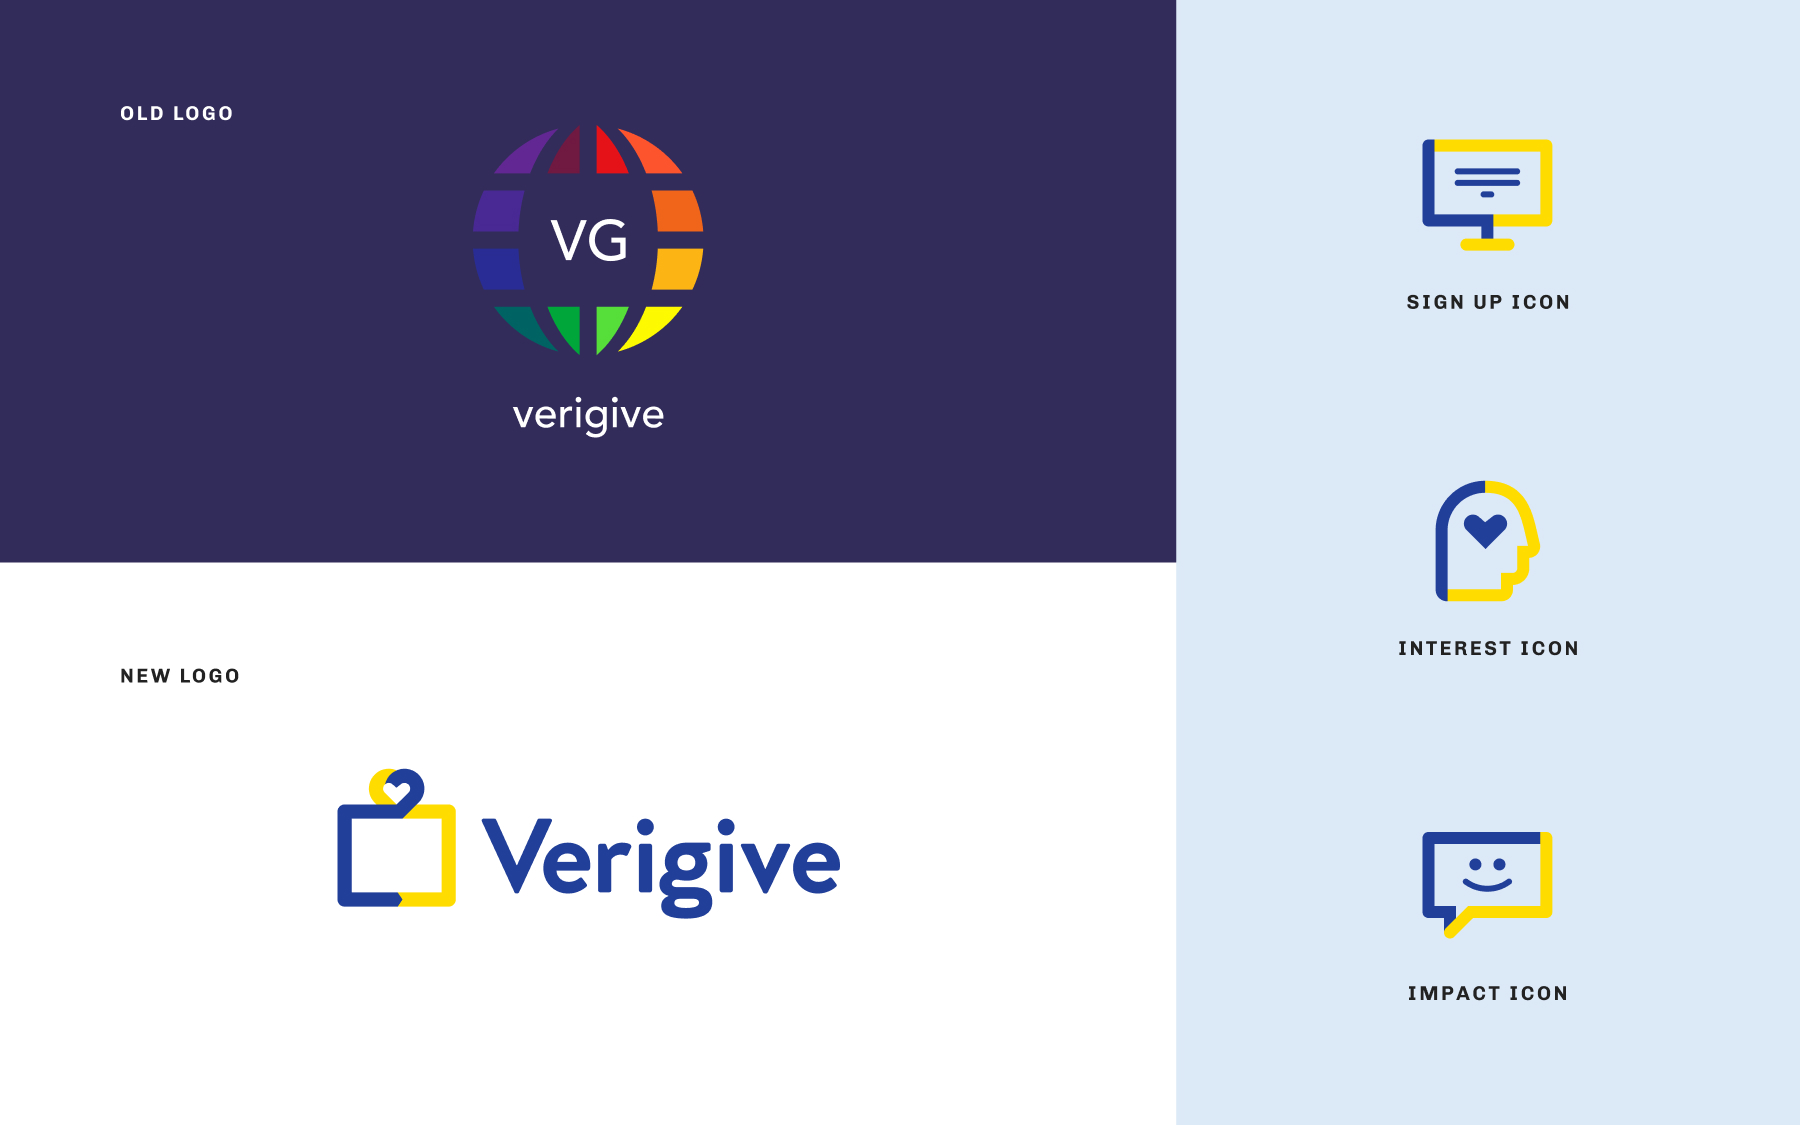 New verigive logo and icons